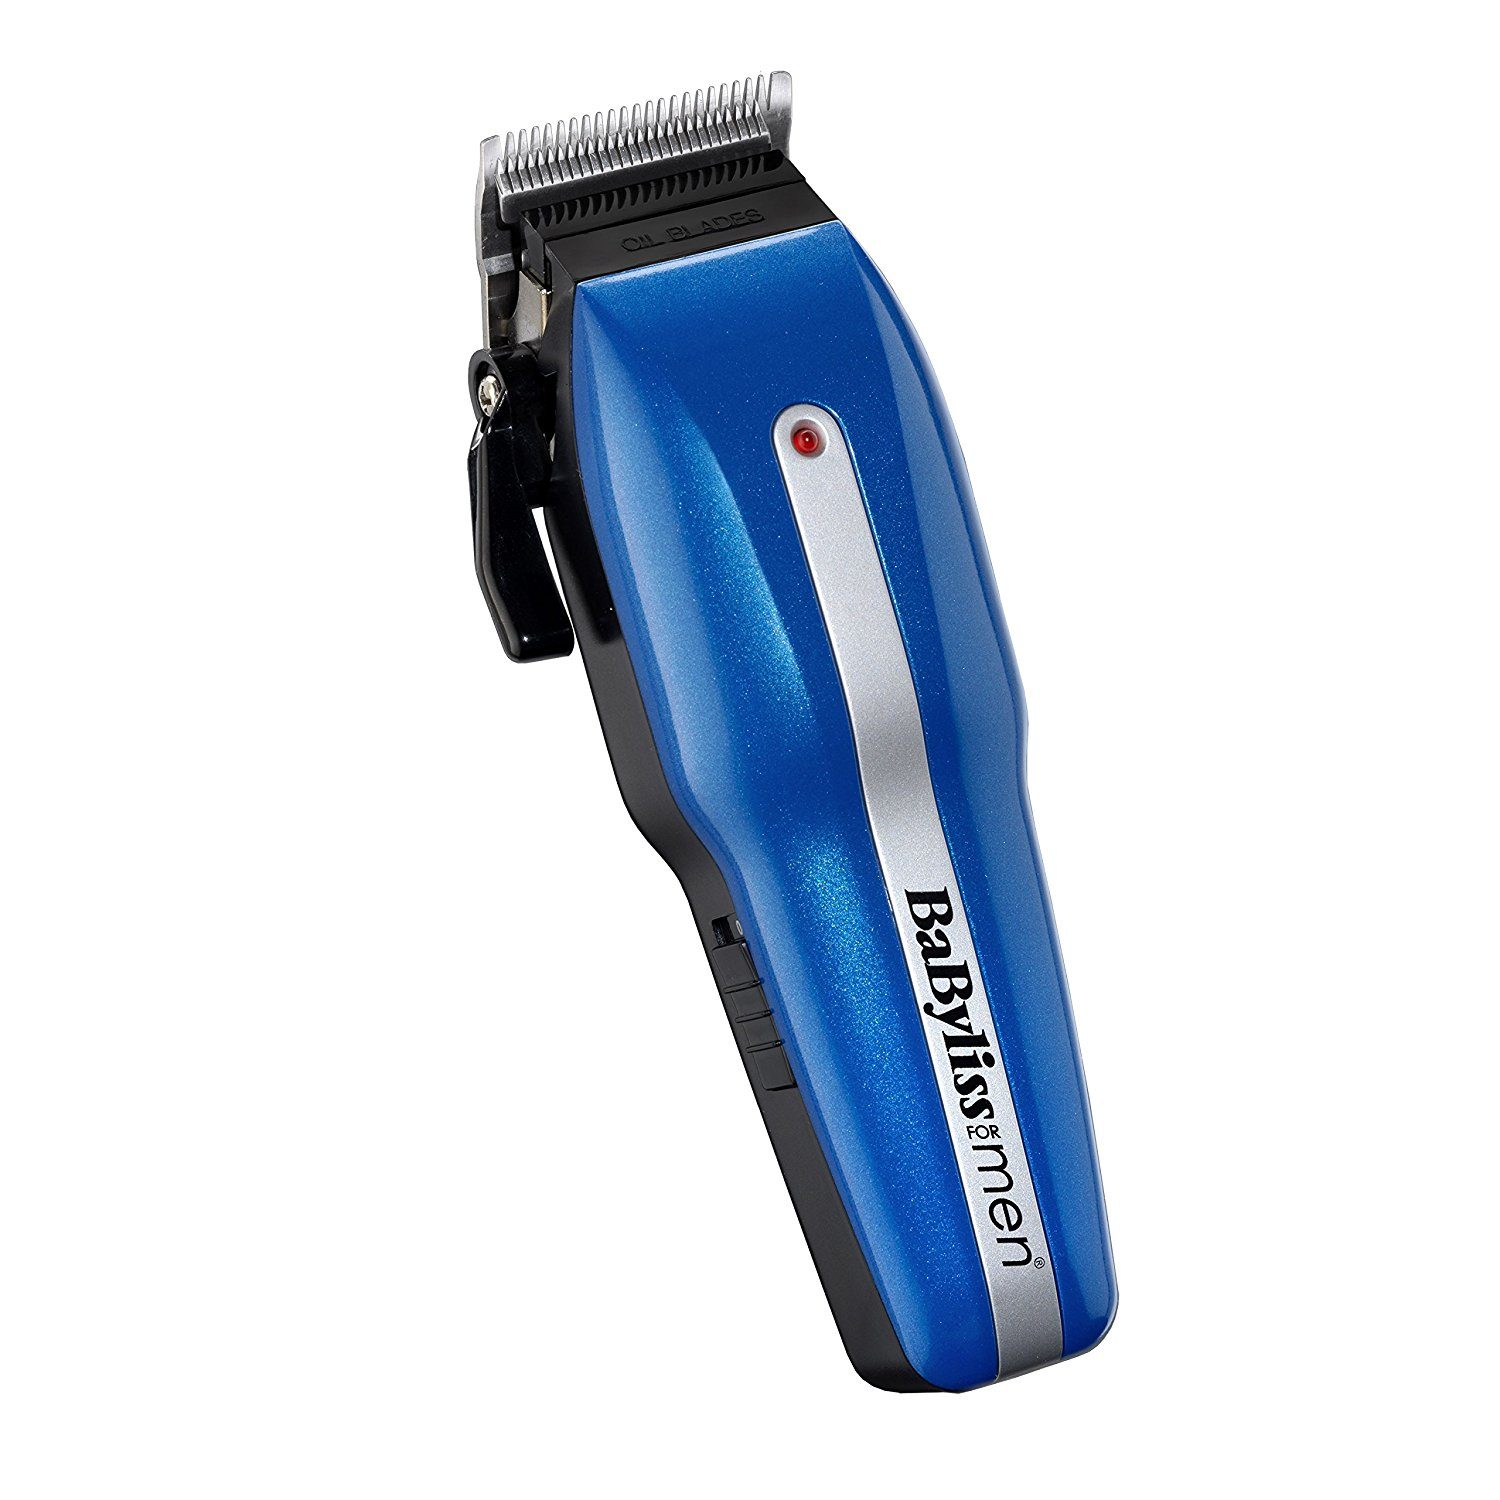 number 6 rated Bablyliss hair clipper